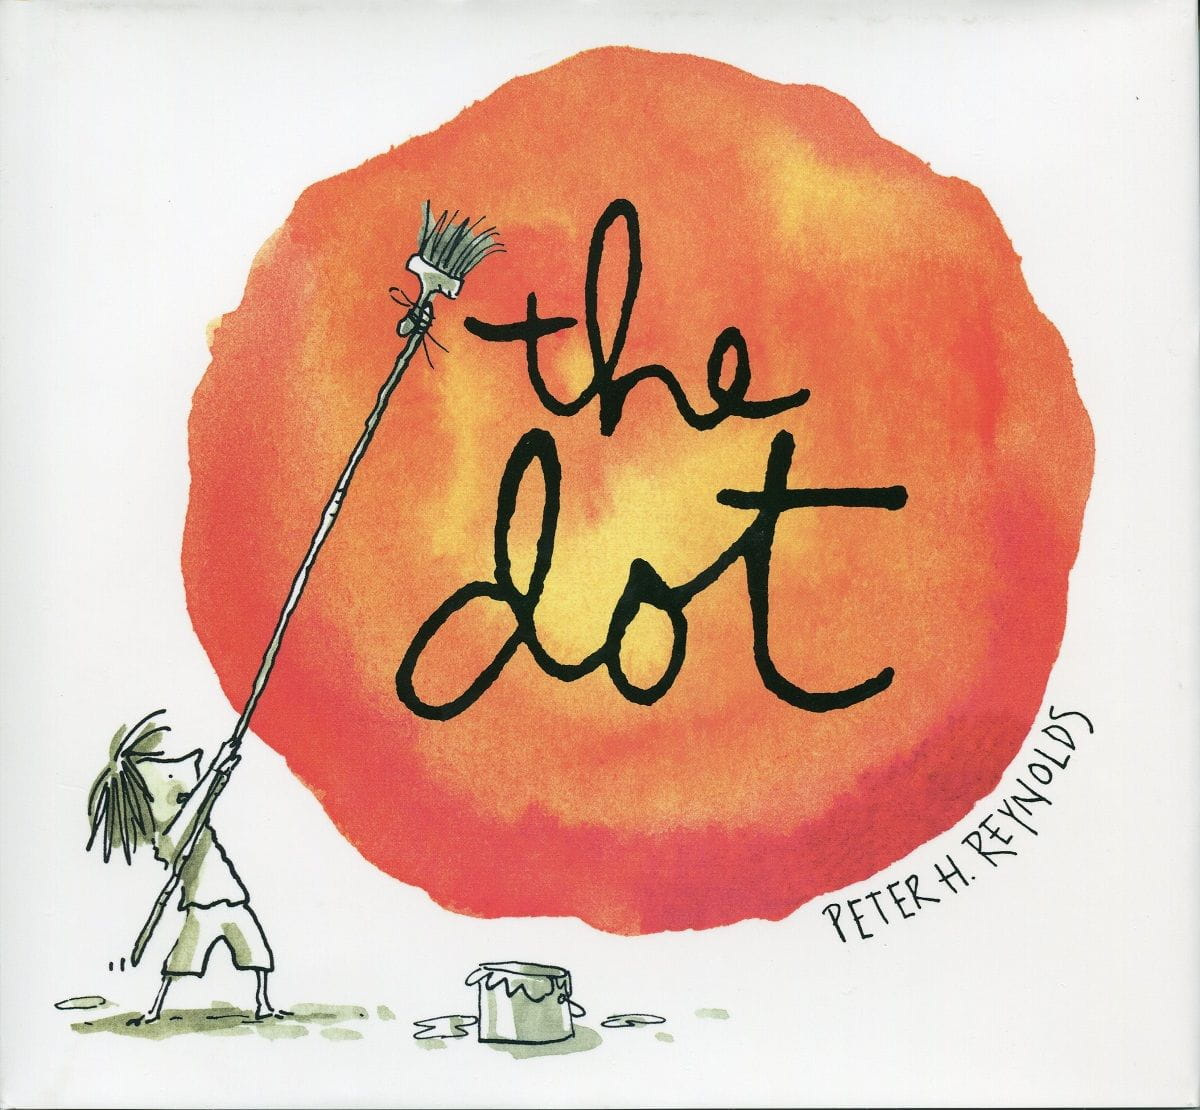 The Dot cover